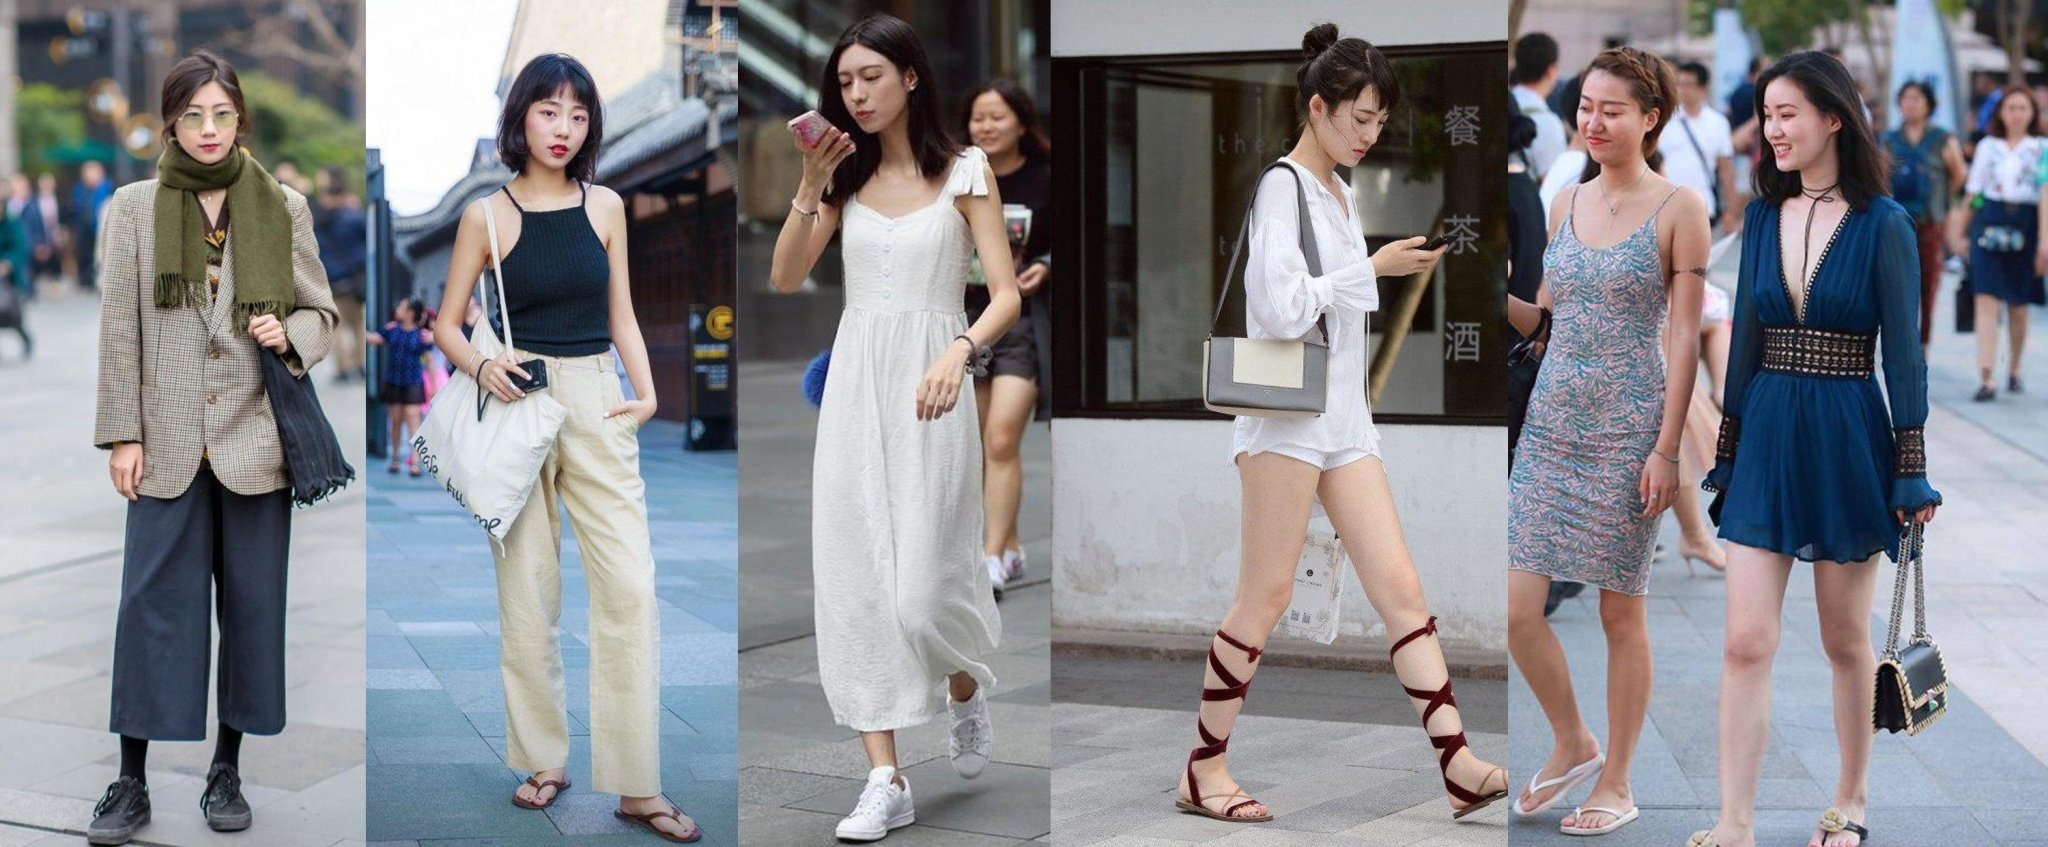 Why Chengdu Is China's Most Fashionable City – CUCTOS